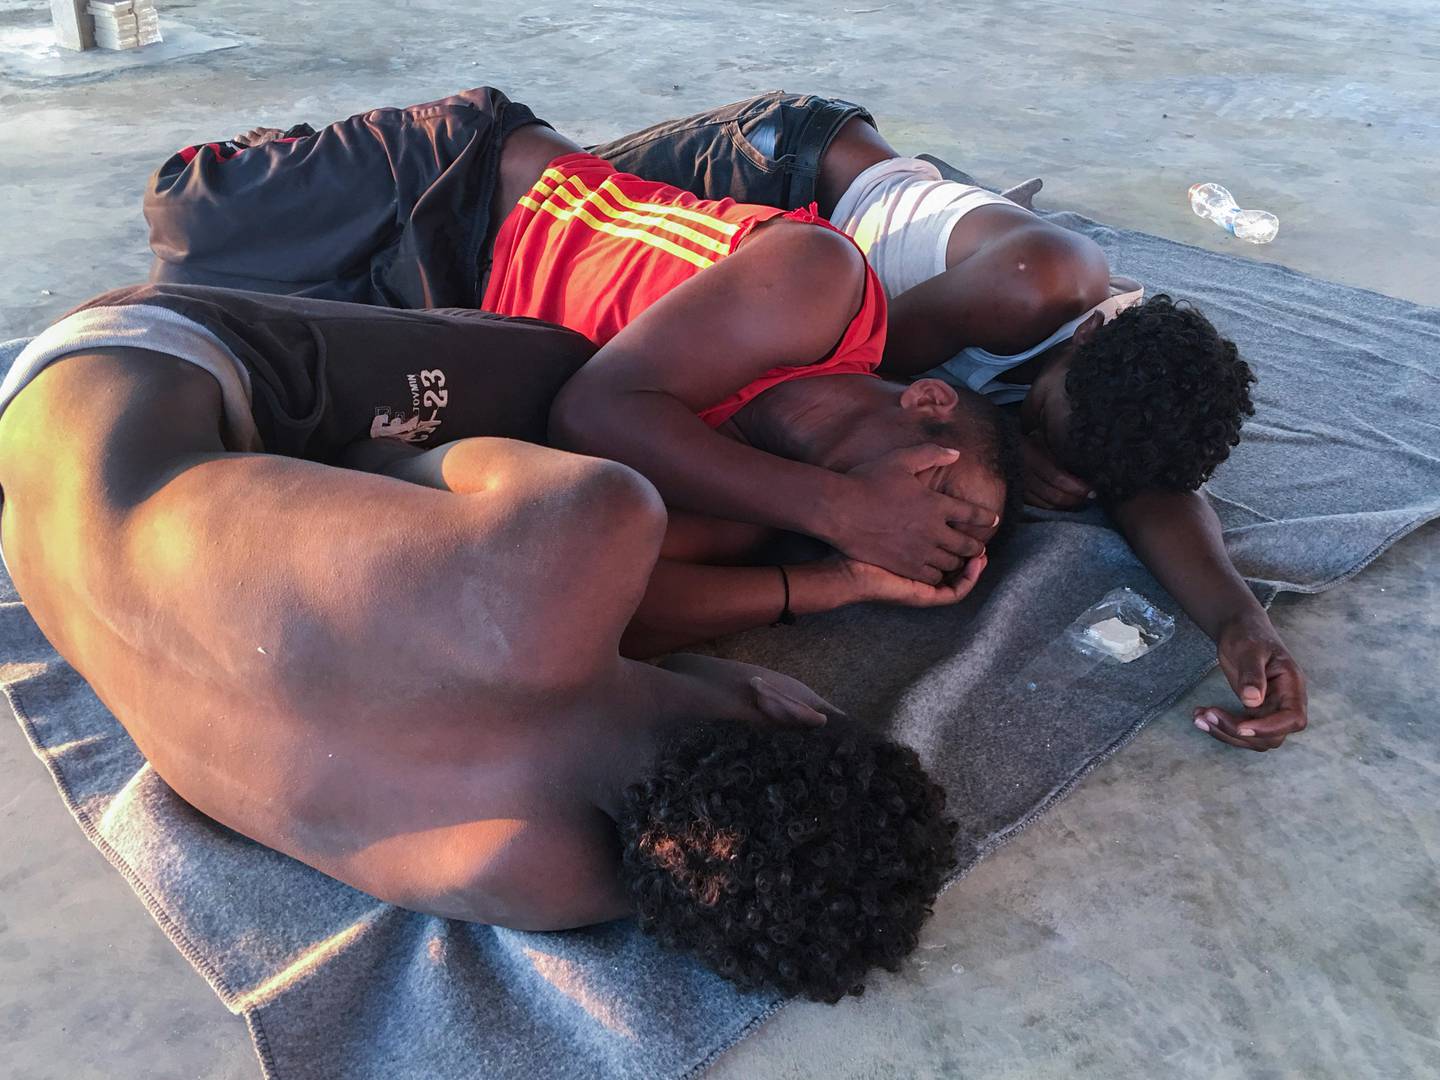 Rescued migrants rest on a coast some 100 kilometers (60 miles) east of Tripoli, Libya, Thursday, July 25, 2019. The U.N. refugee agency and the International Rescue Committee say up to 150 may have perished at sea off the coast of Libya. The country's coast guard says the Europe-bound migrants are missing and feared drowned after the boats they were traveling on capsized in the Mediterranean Sea. A spokesman says they rescued around 137 migrants on Thursday. (AP Photo/Hazem Ahmed)